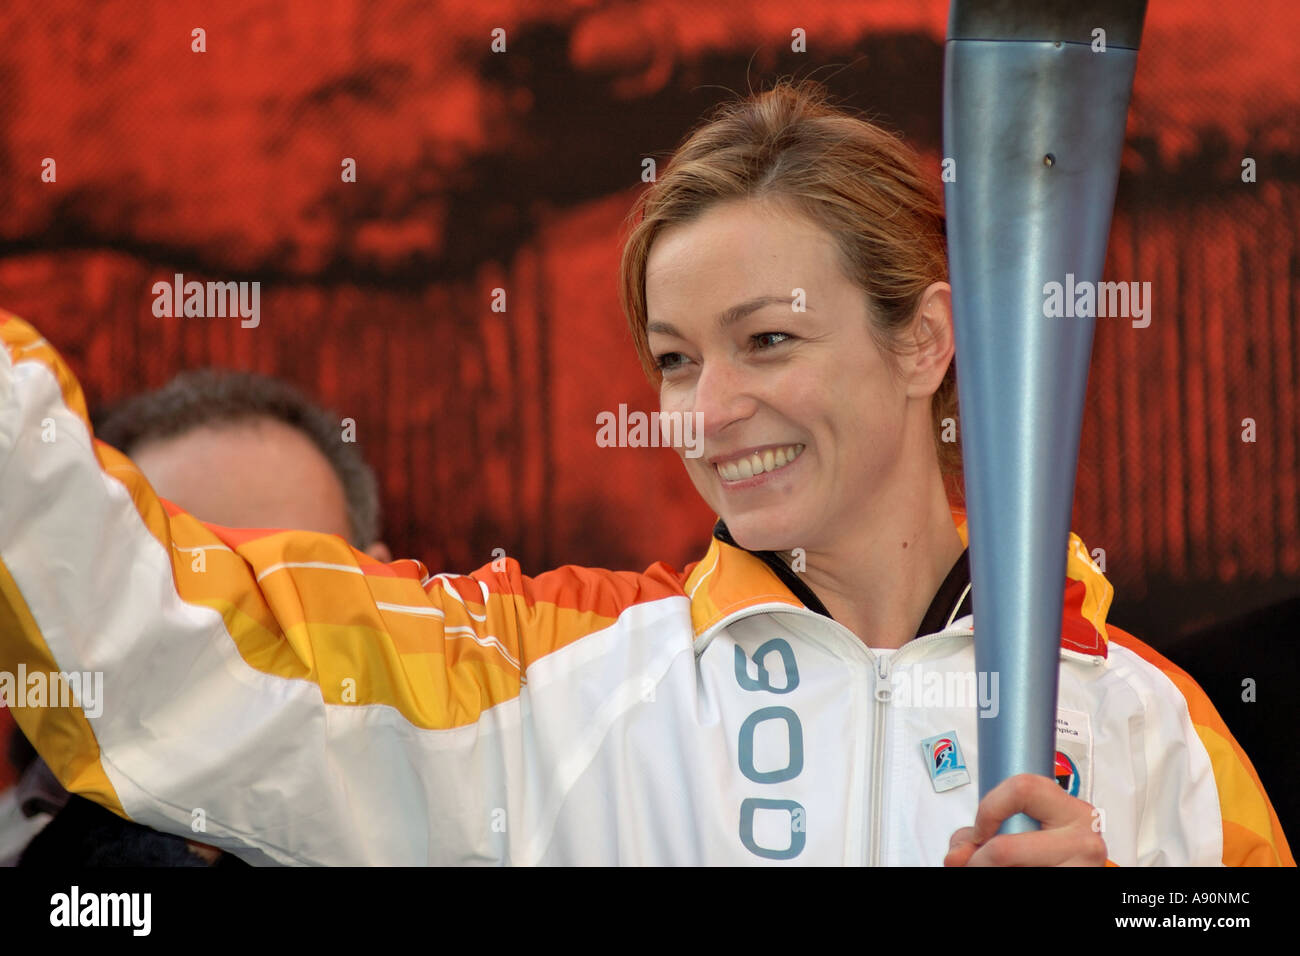 Stefania Rocca High Resolution Stock Photography and Images - Alamy